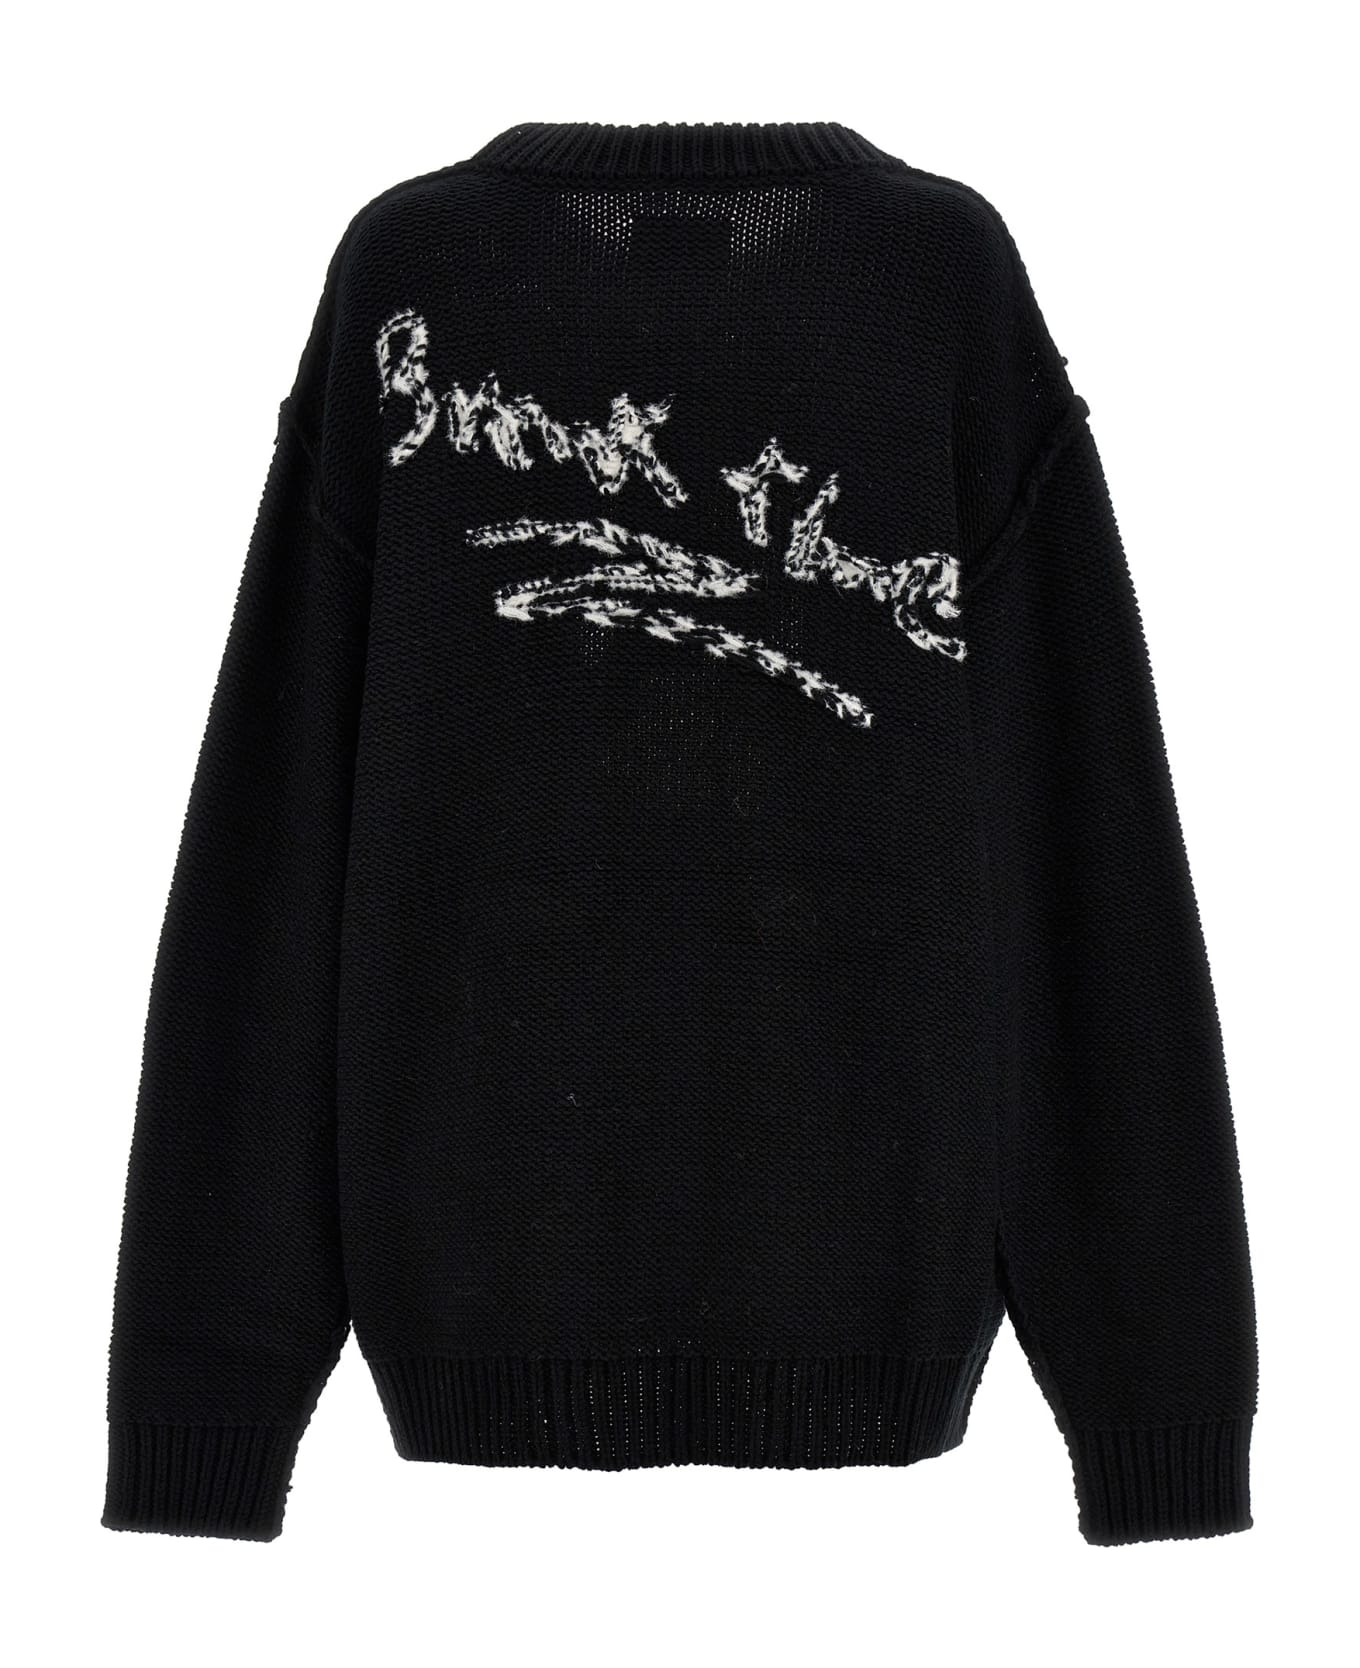 doublet Cut-out Sweater - Black ニットウェア